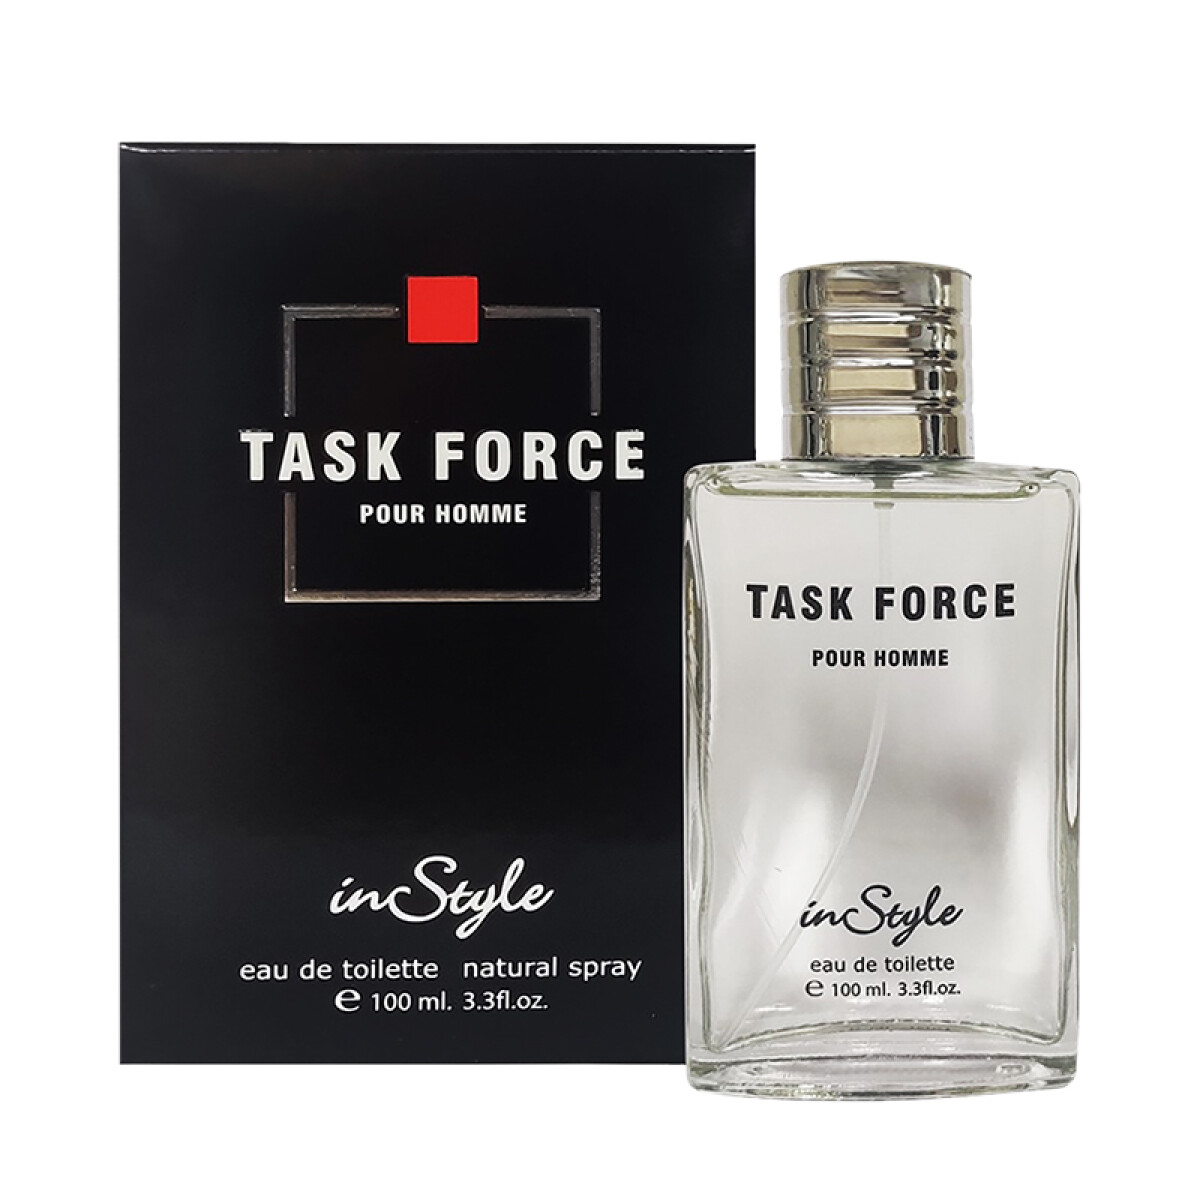 Perfume IN STYLE para hombre | 100 ml - Task Force 